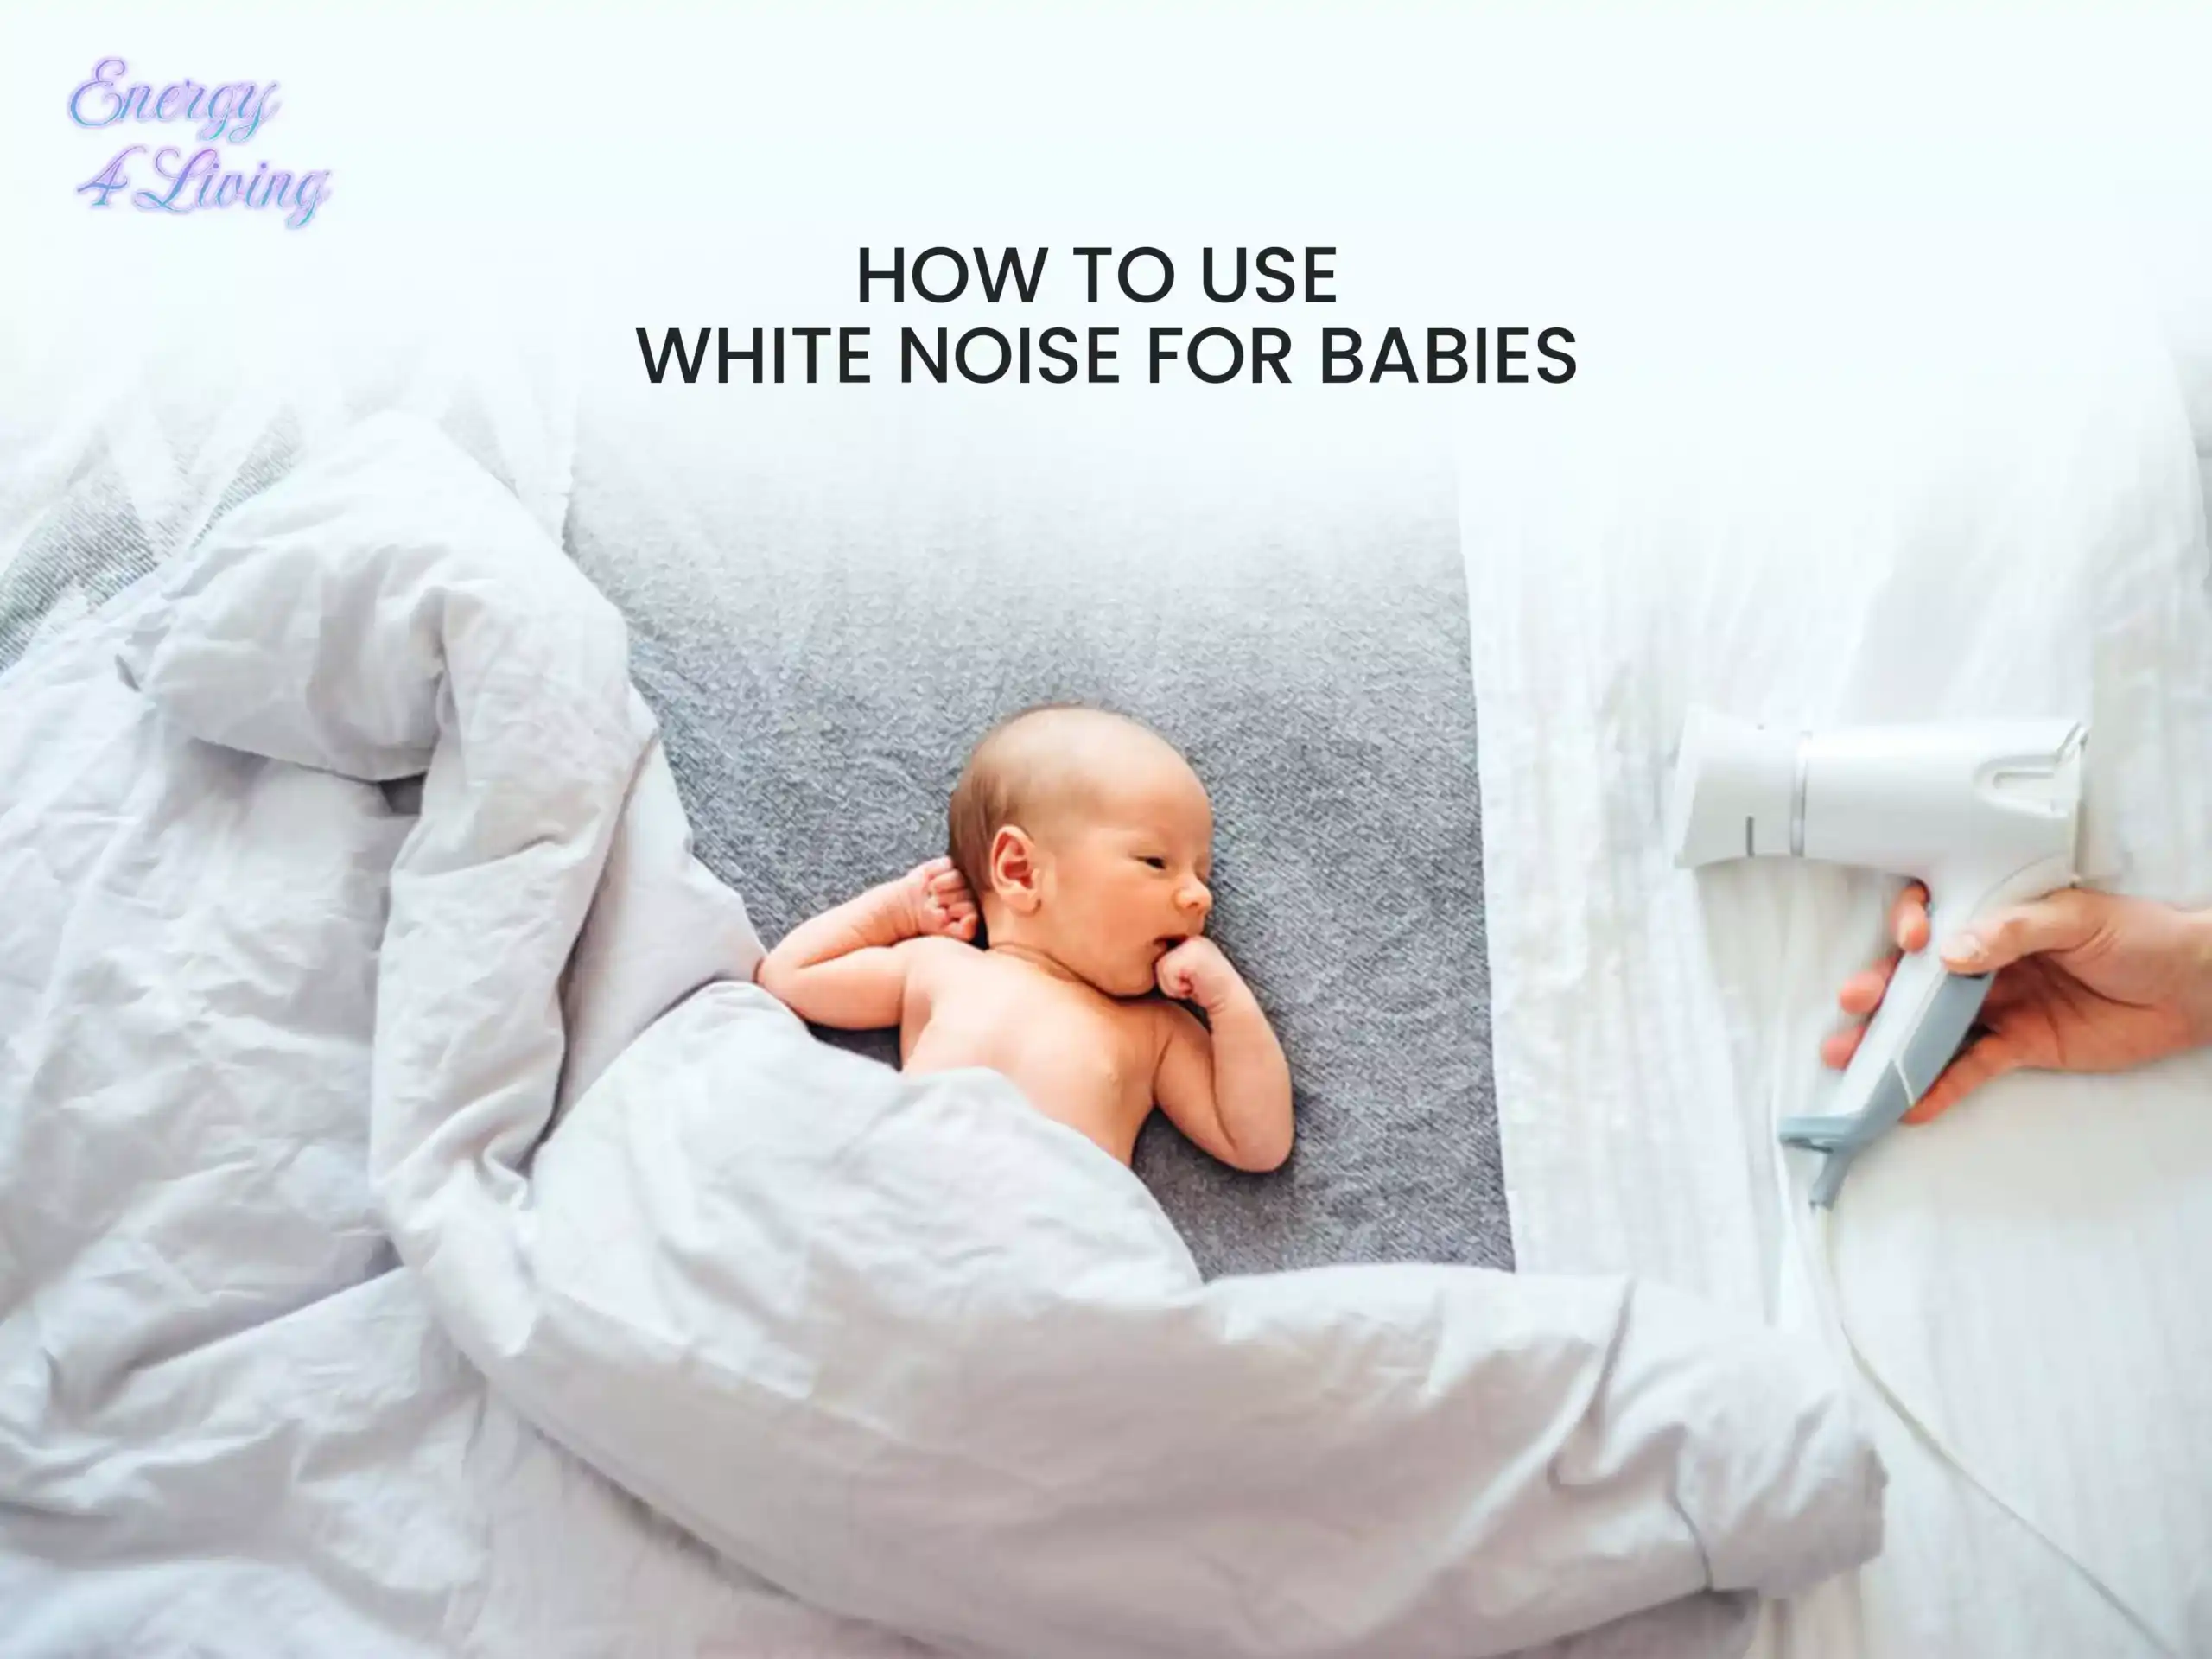 How to Use White Noise for Babies